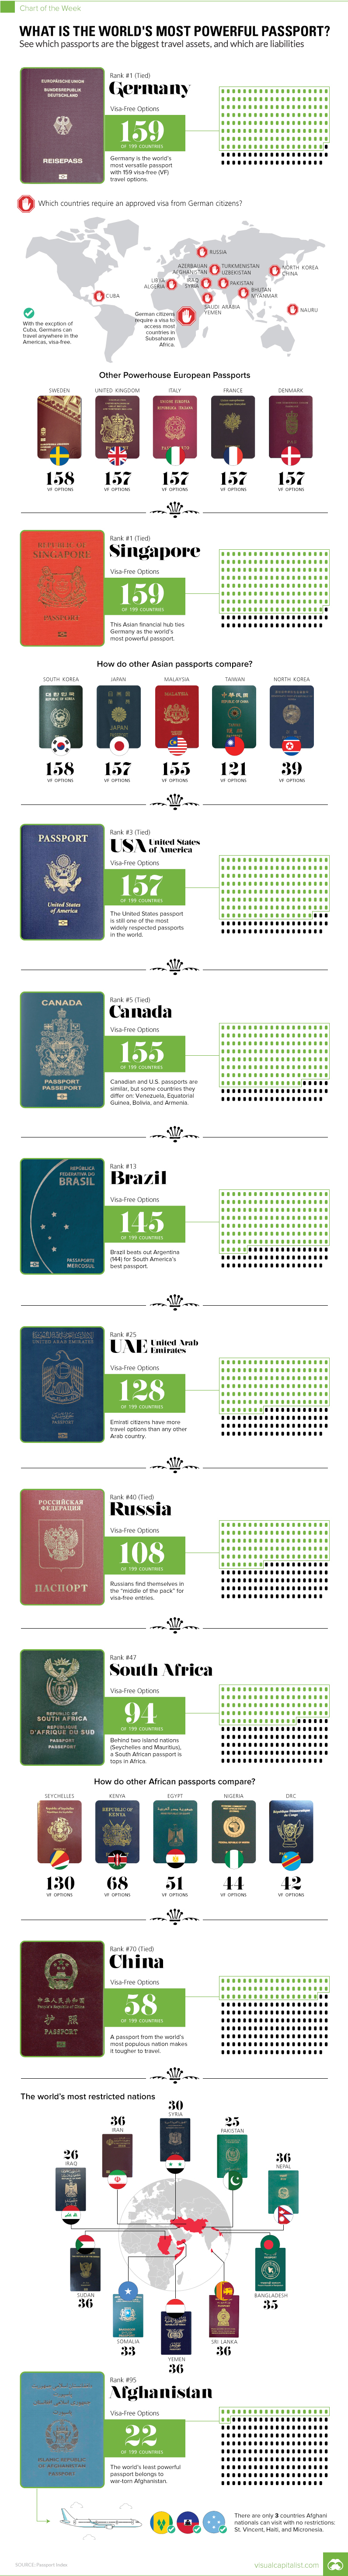 Most Powerful Passports in the World in 2023: Full List